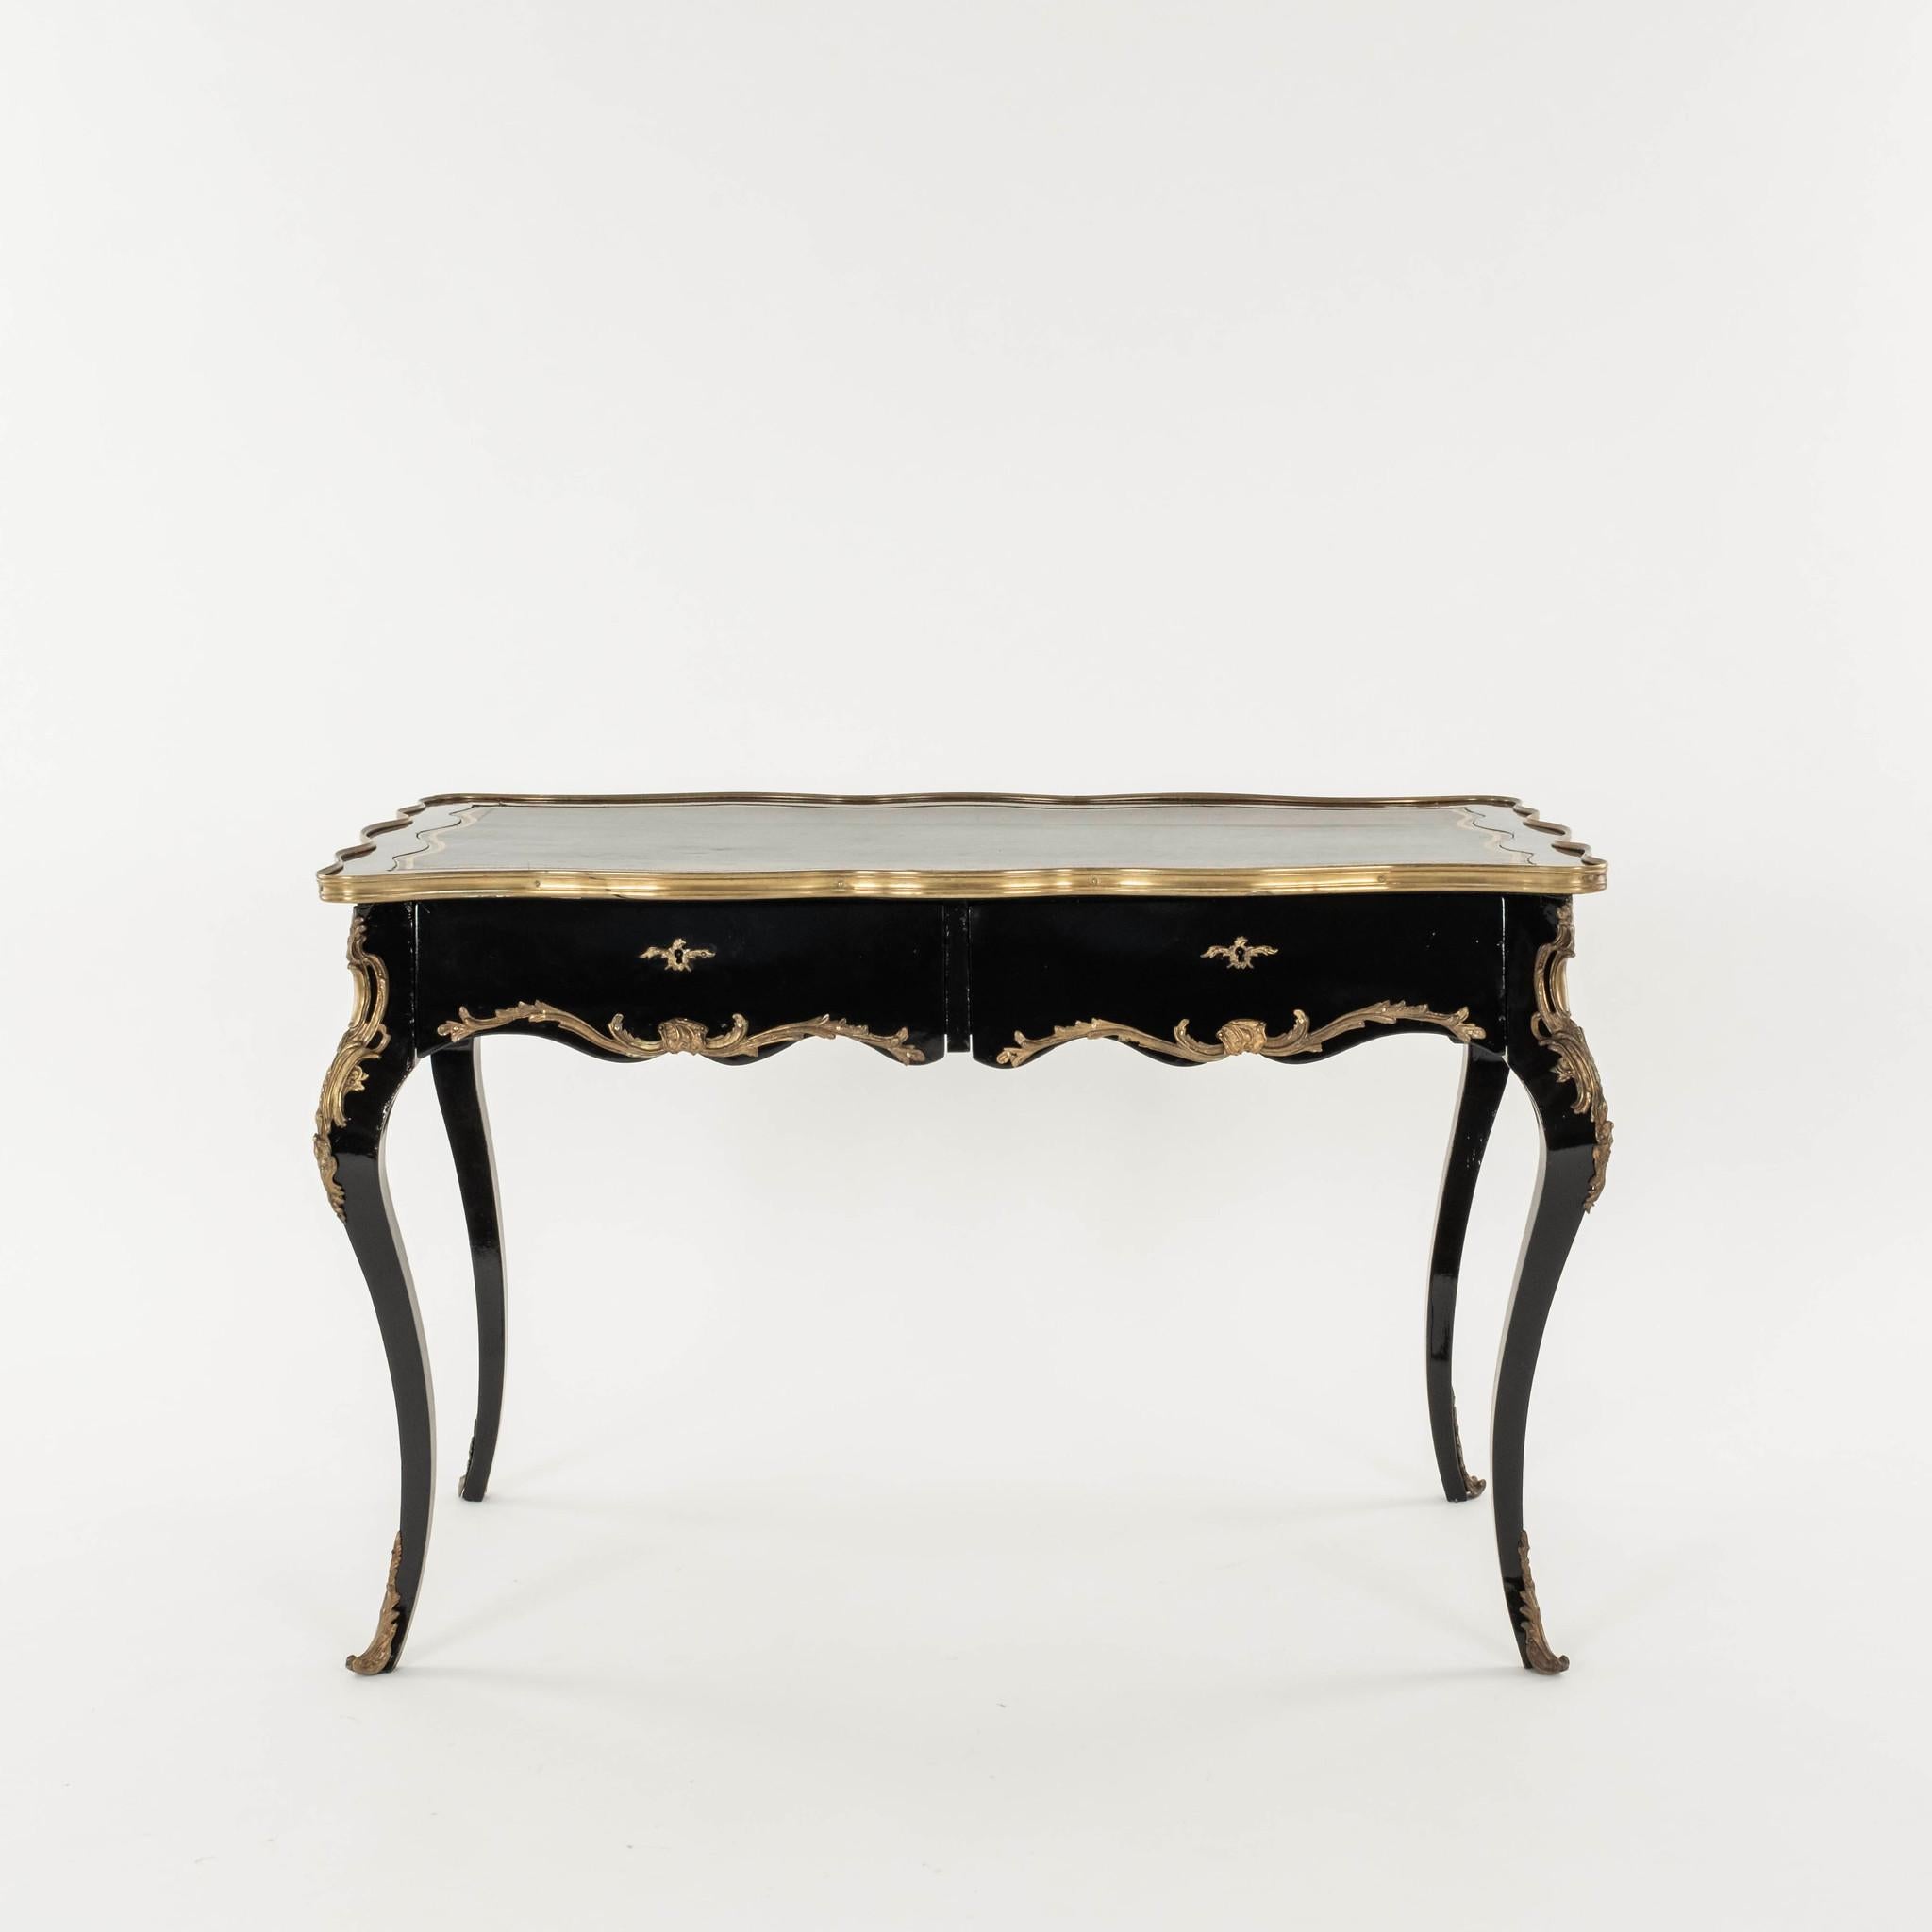 19th Century French Louis XV Style Bureau Plat In Good Condition For Sale In Houston, TX